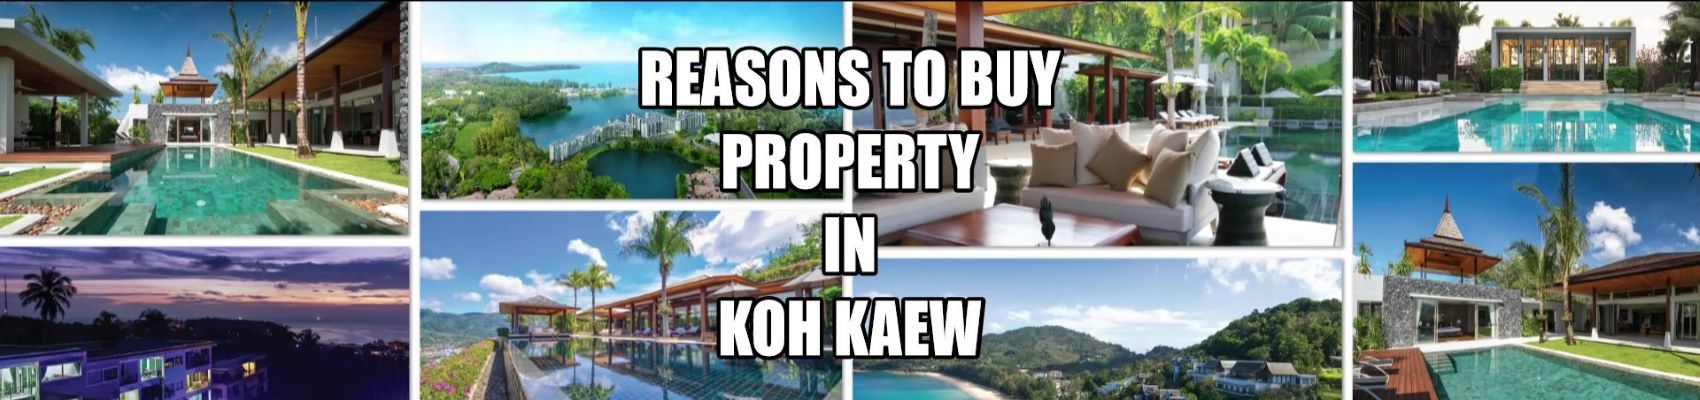 Buying affordable property in Koh Kaew